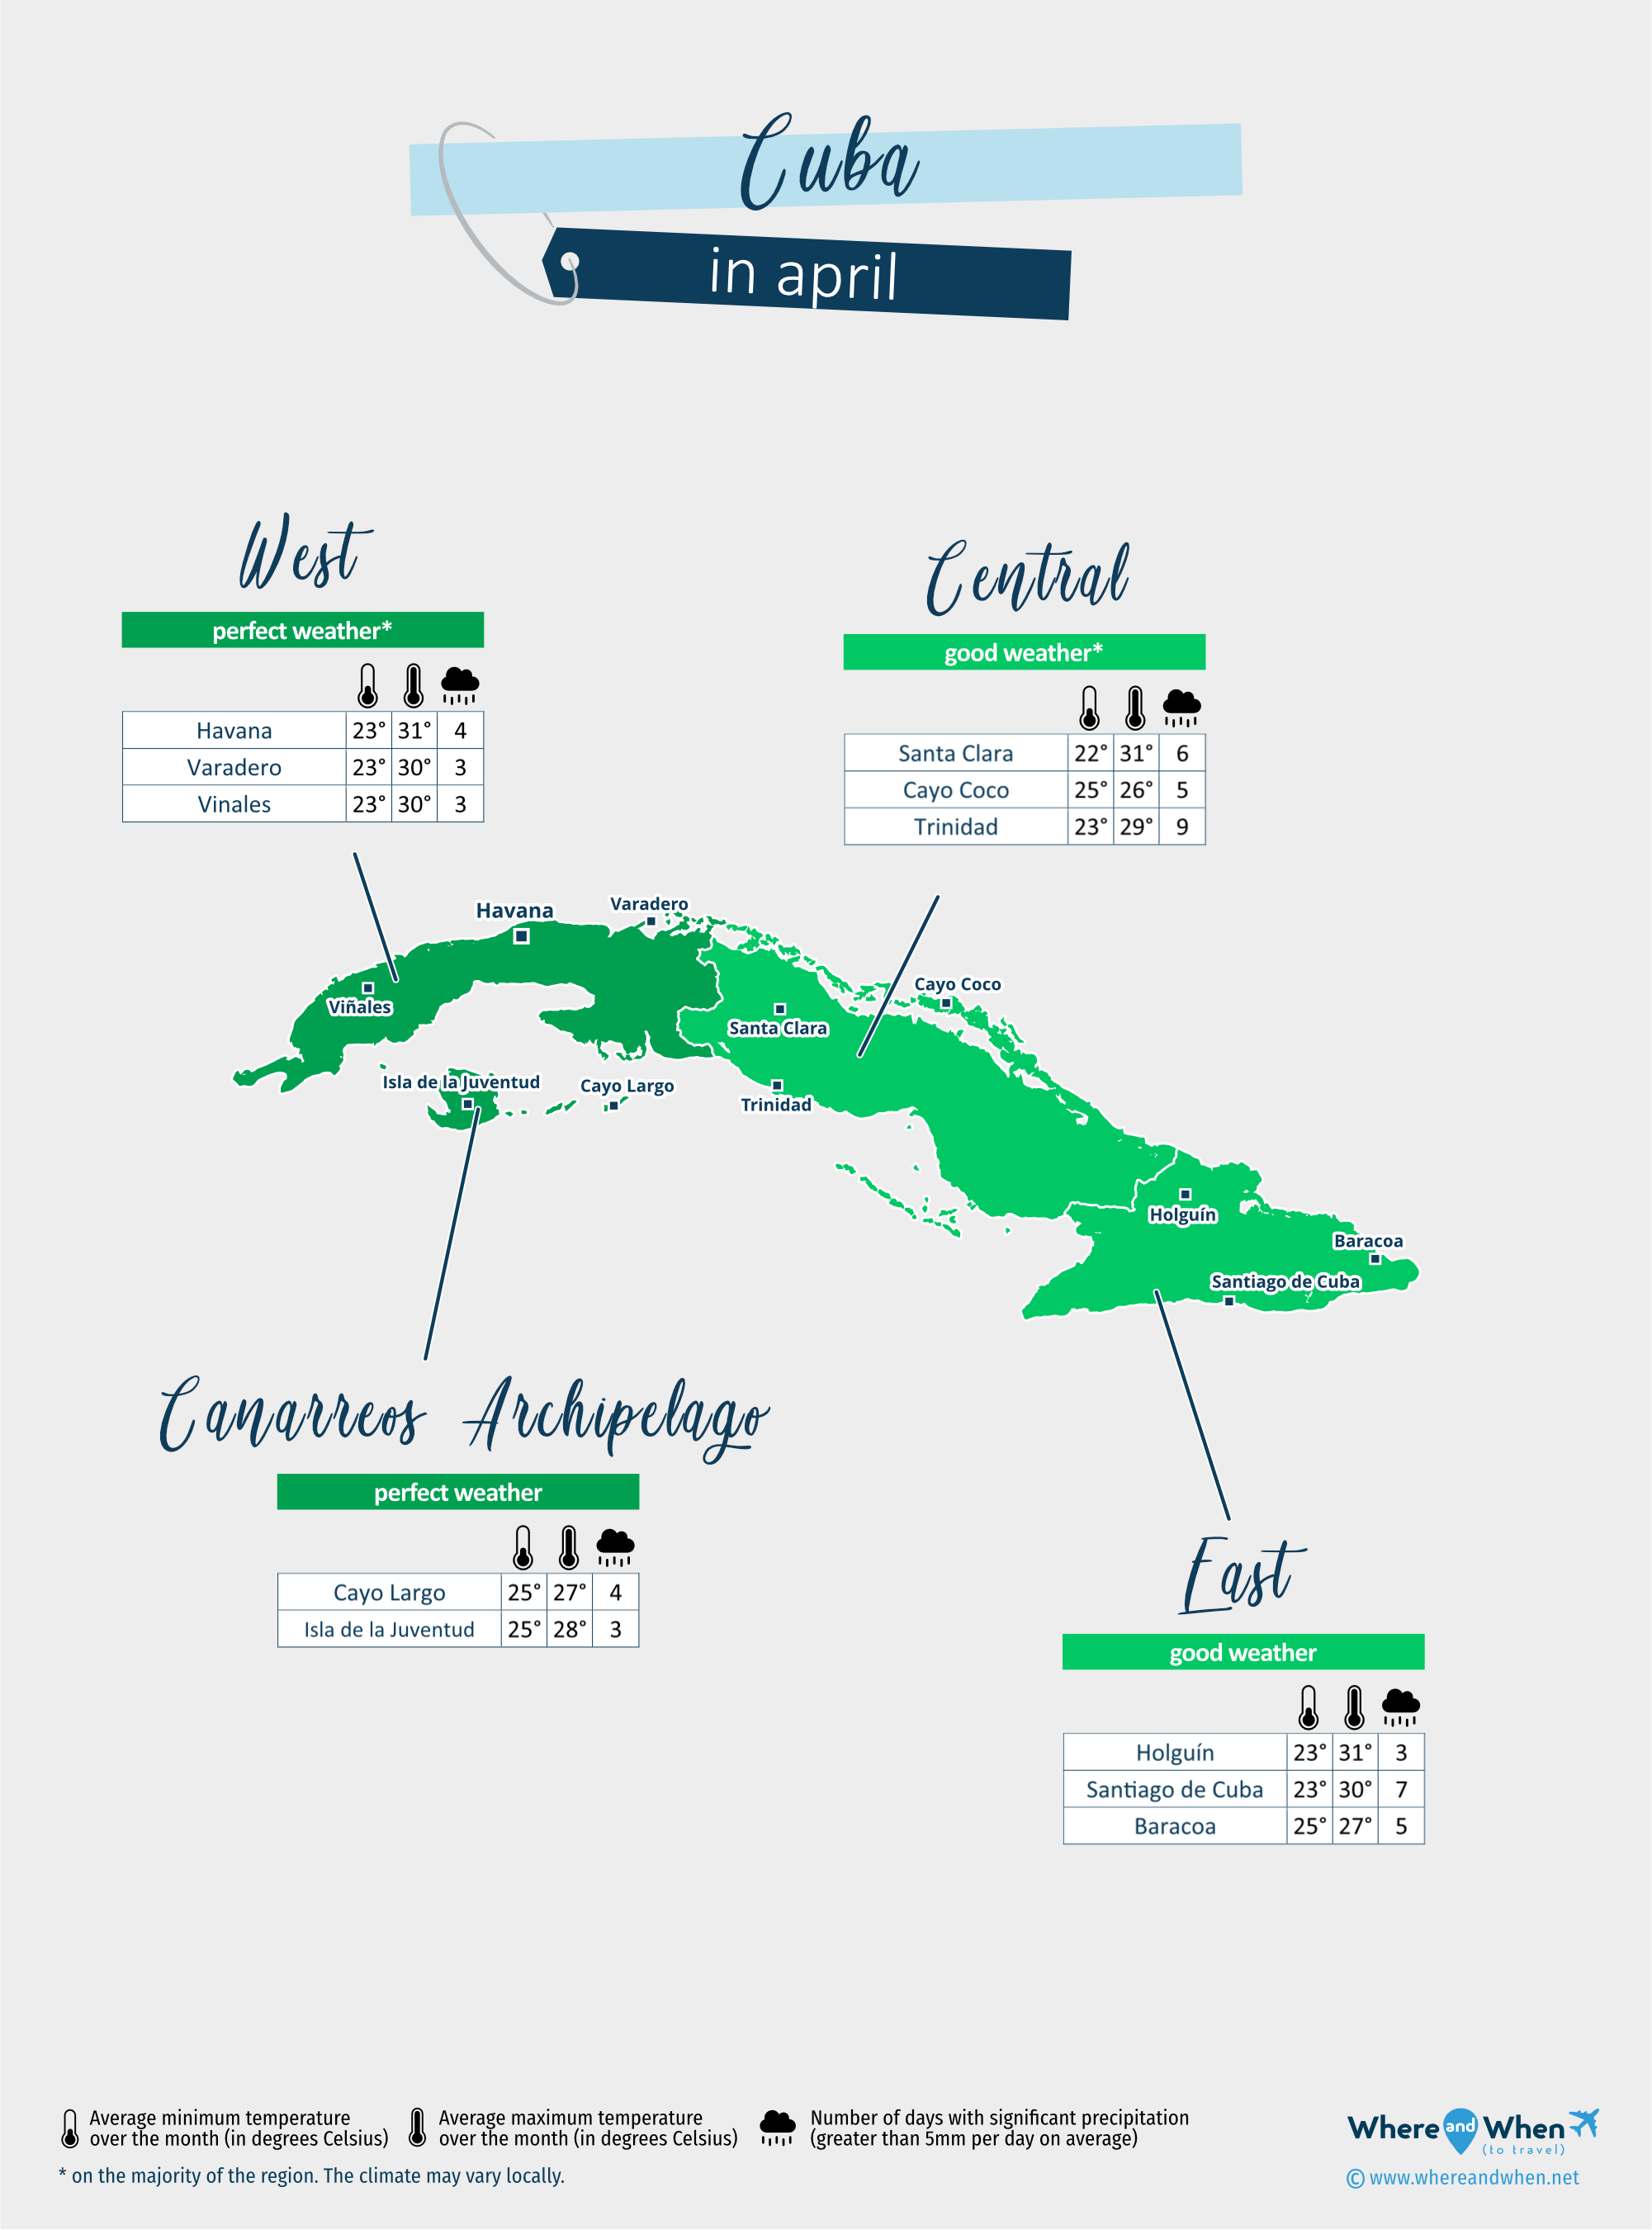 Cuba: weather map in april in different regions